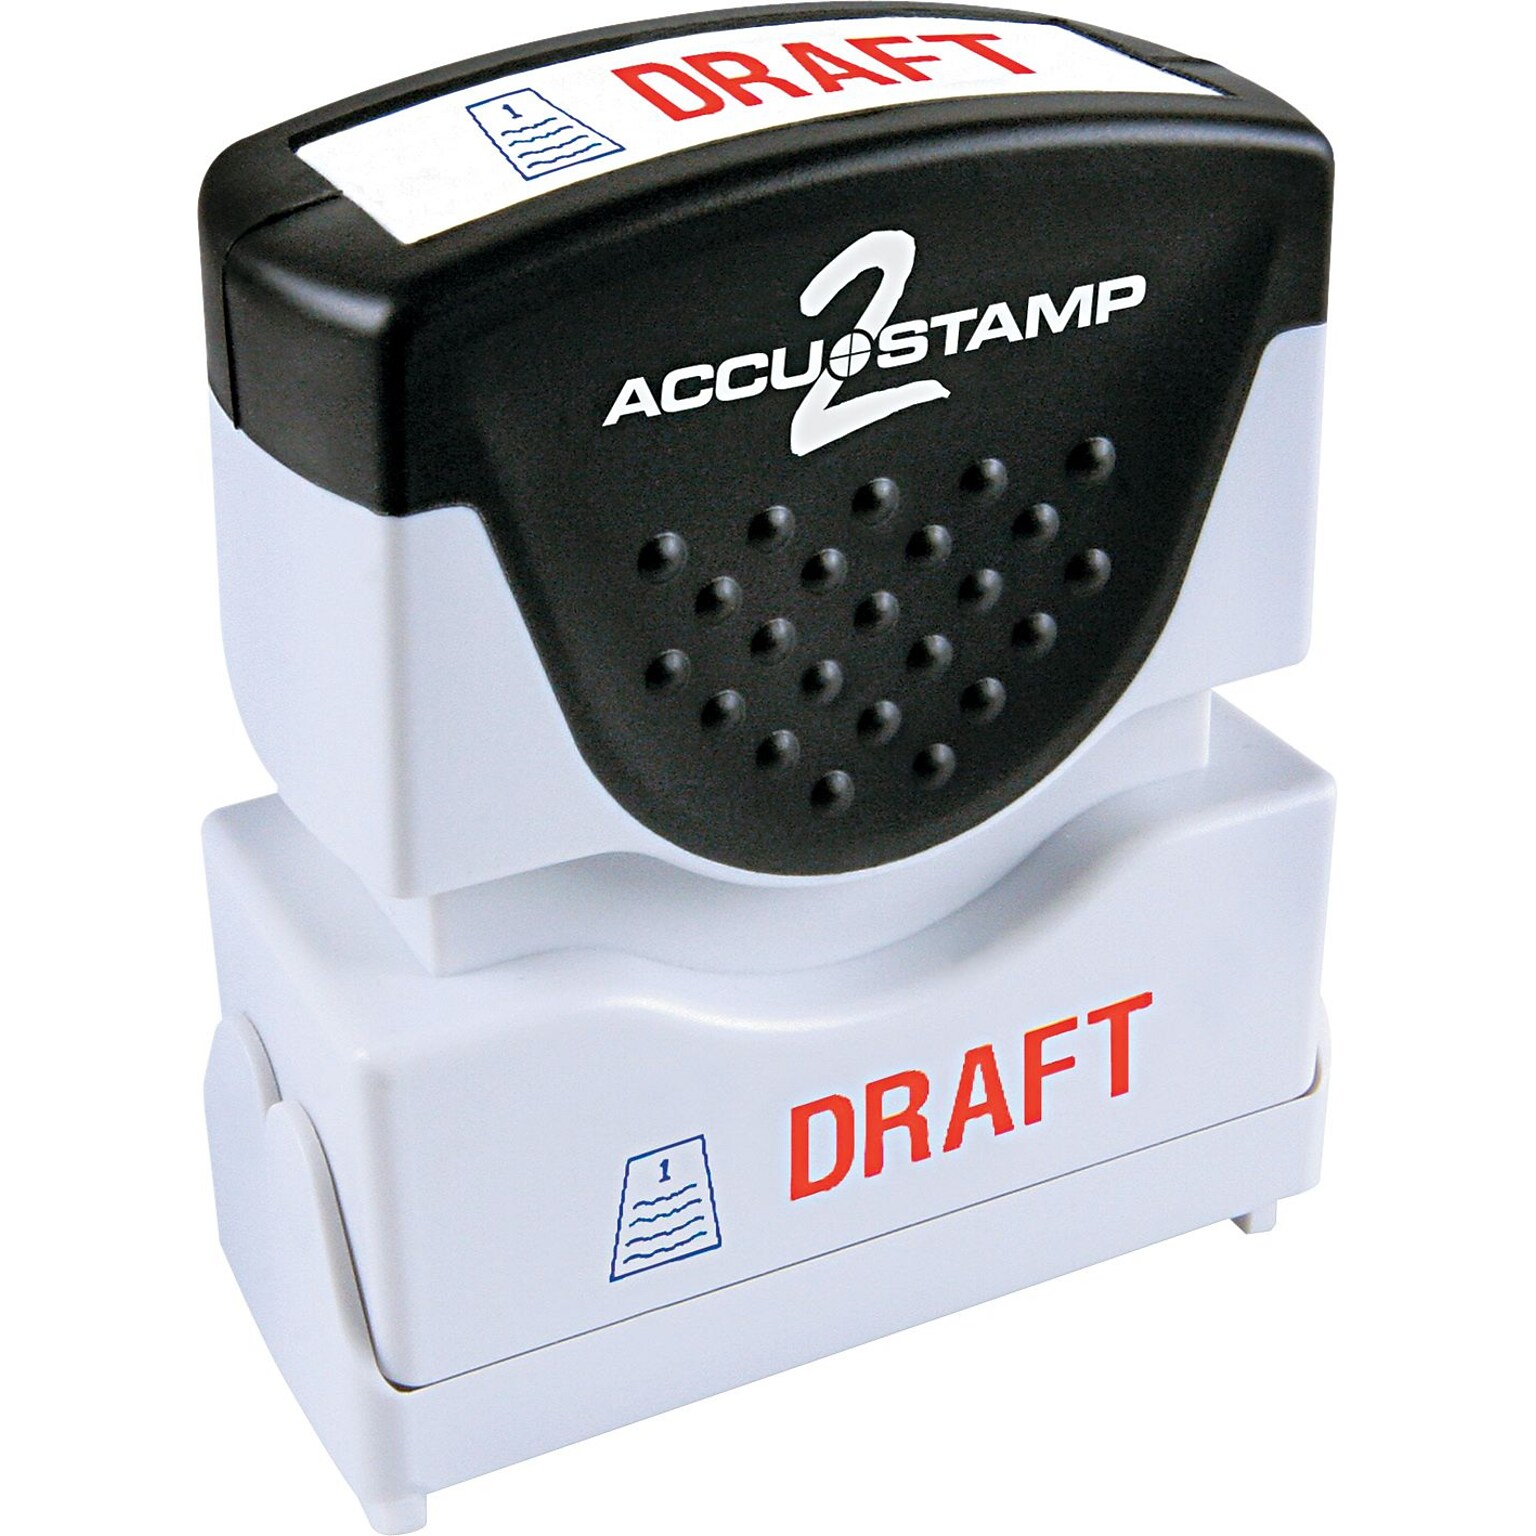 Accu-Stamp2® Two-Color Pre-Inked Shutter Message Stamp, DRAFT, 1/2 x 1-5/8 Impression, Red/Blue Ink (035542)